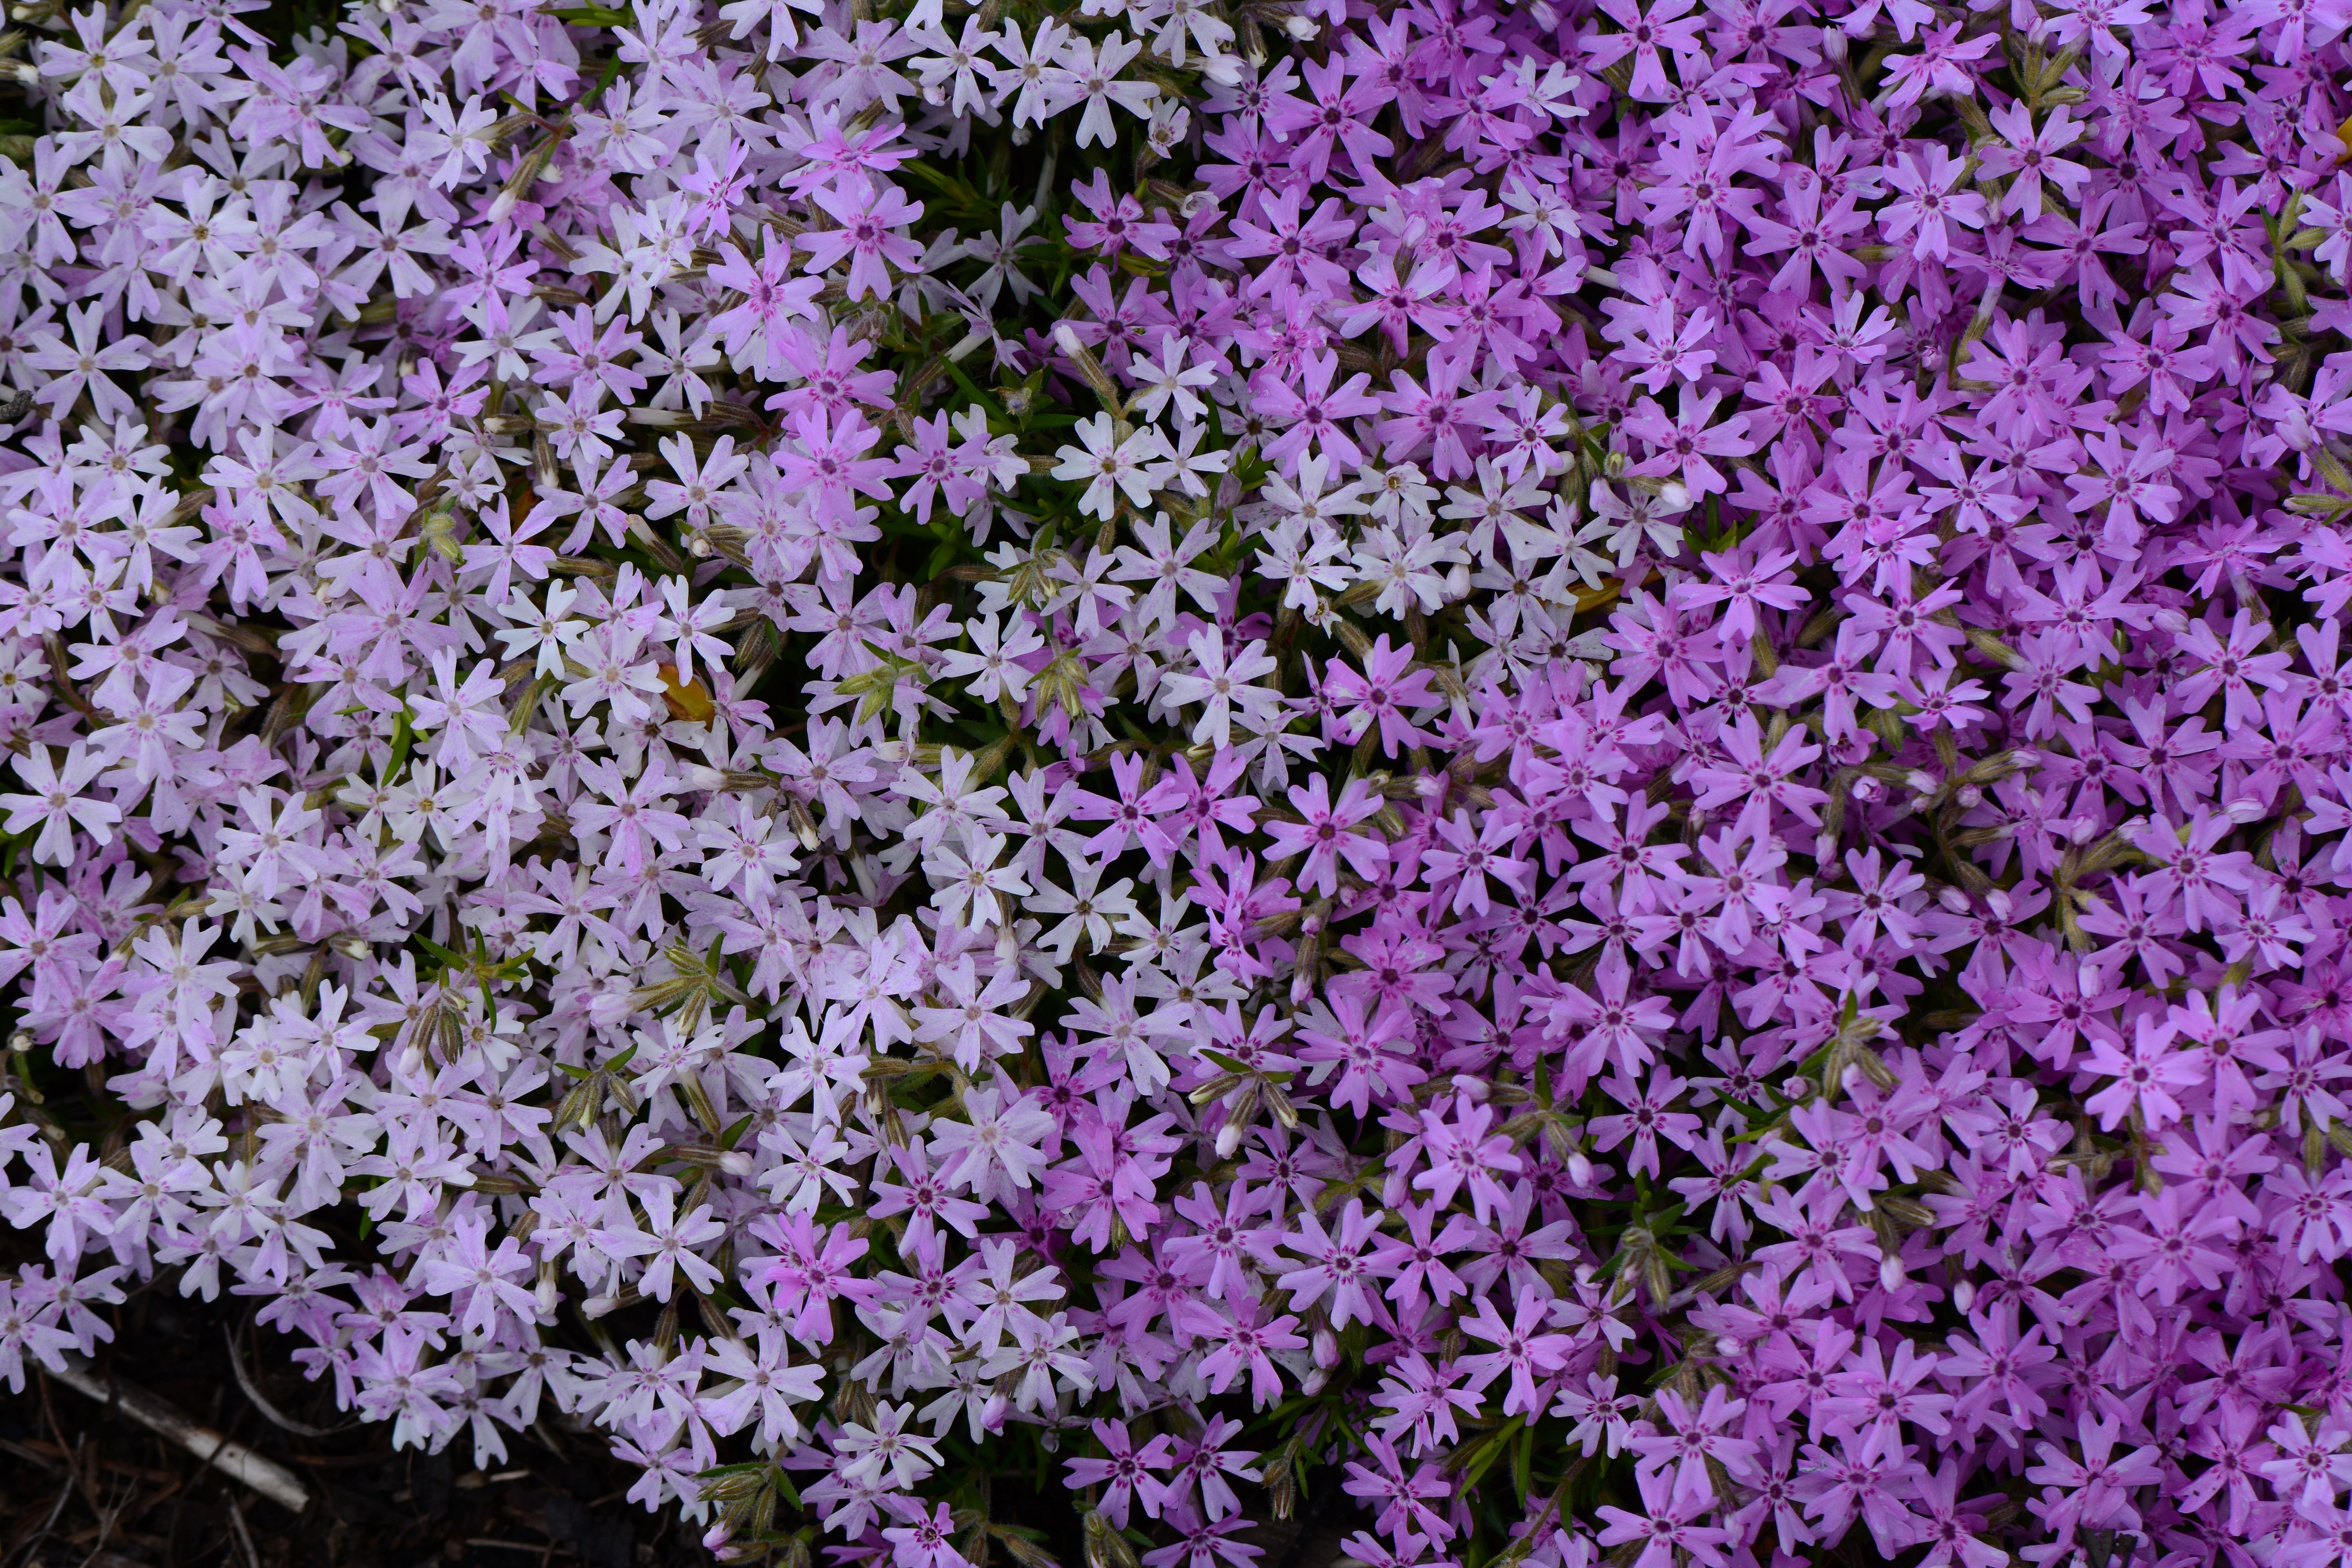 images/plants/phlox/phl-perfectly-puzzling/phl-perfectly-puzzling-0006.jpg